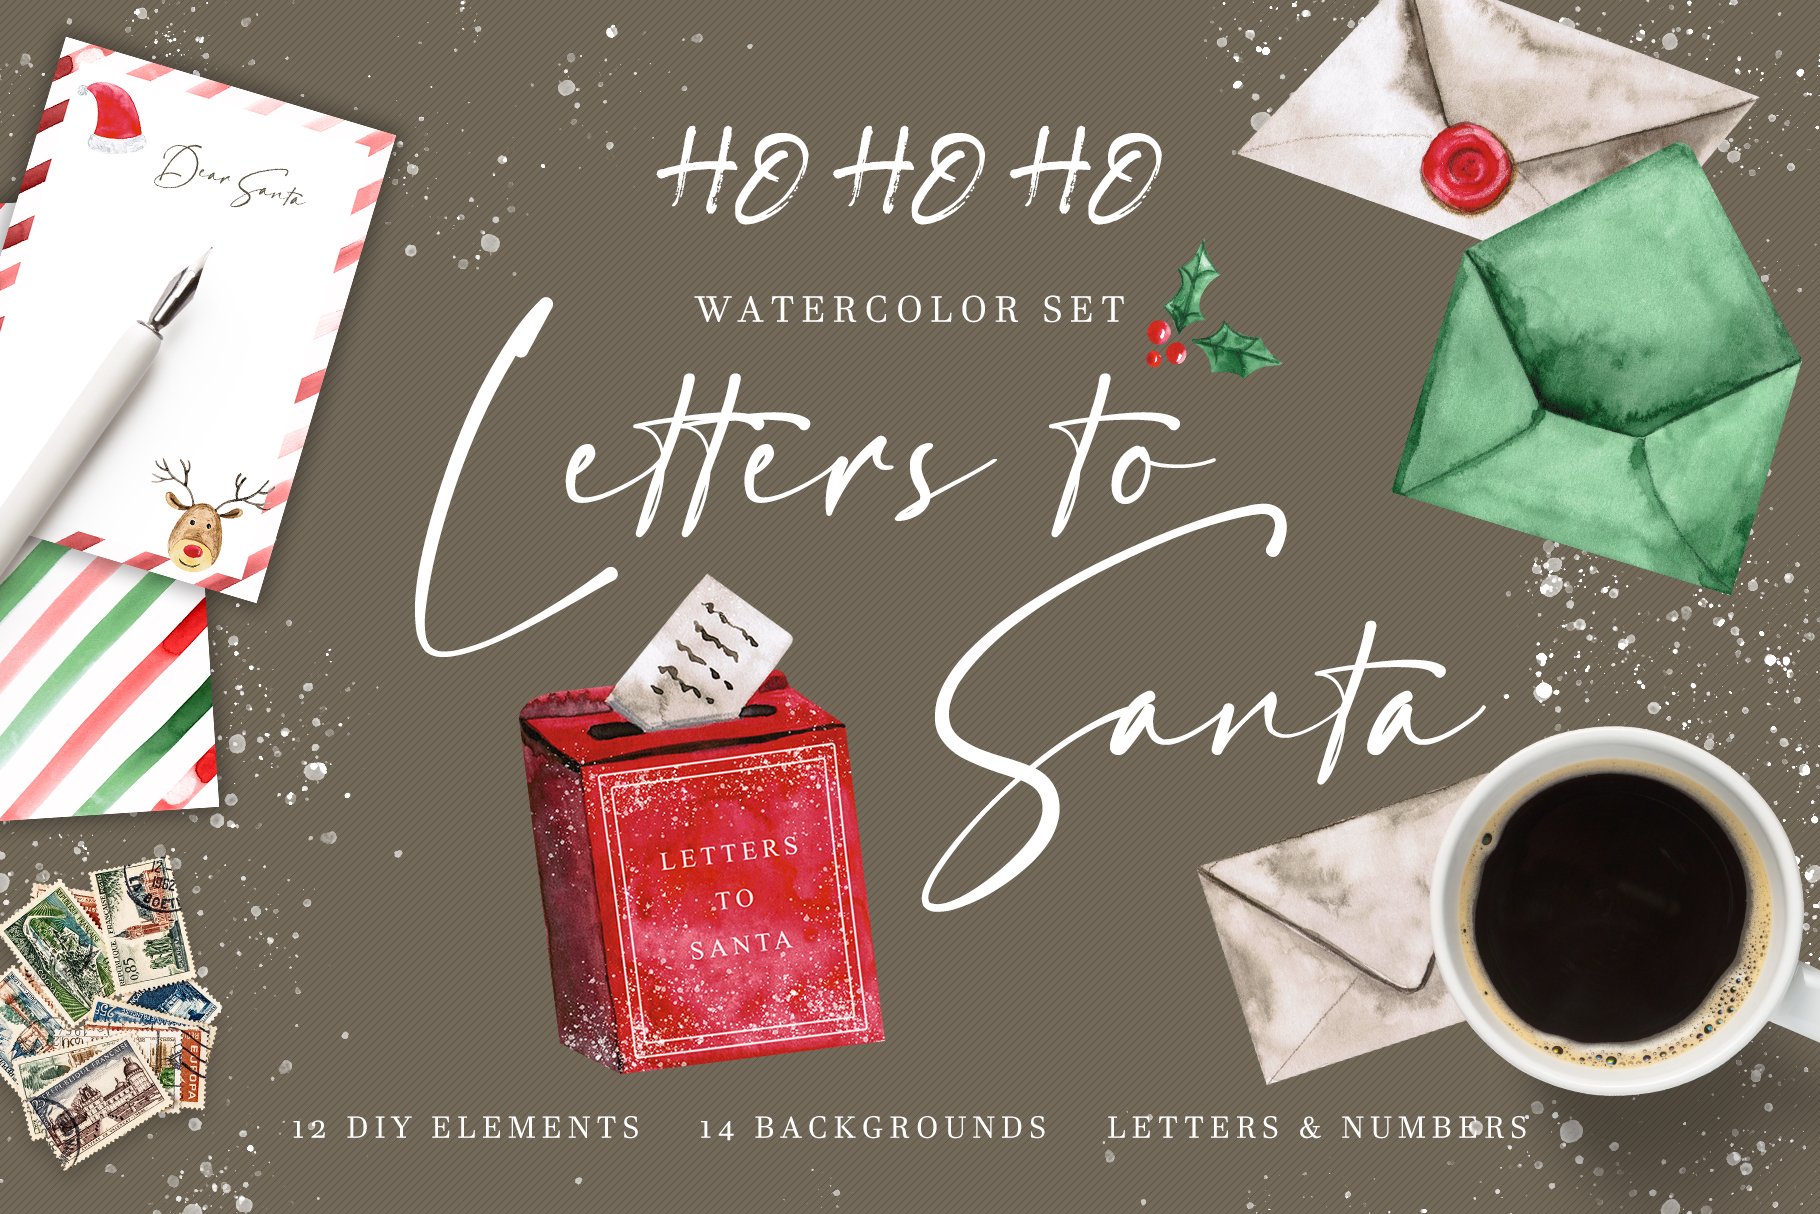 Letters to Santa - watercolor set cover image.